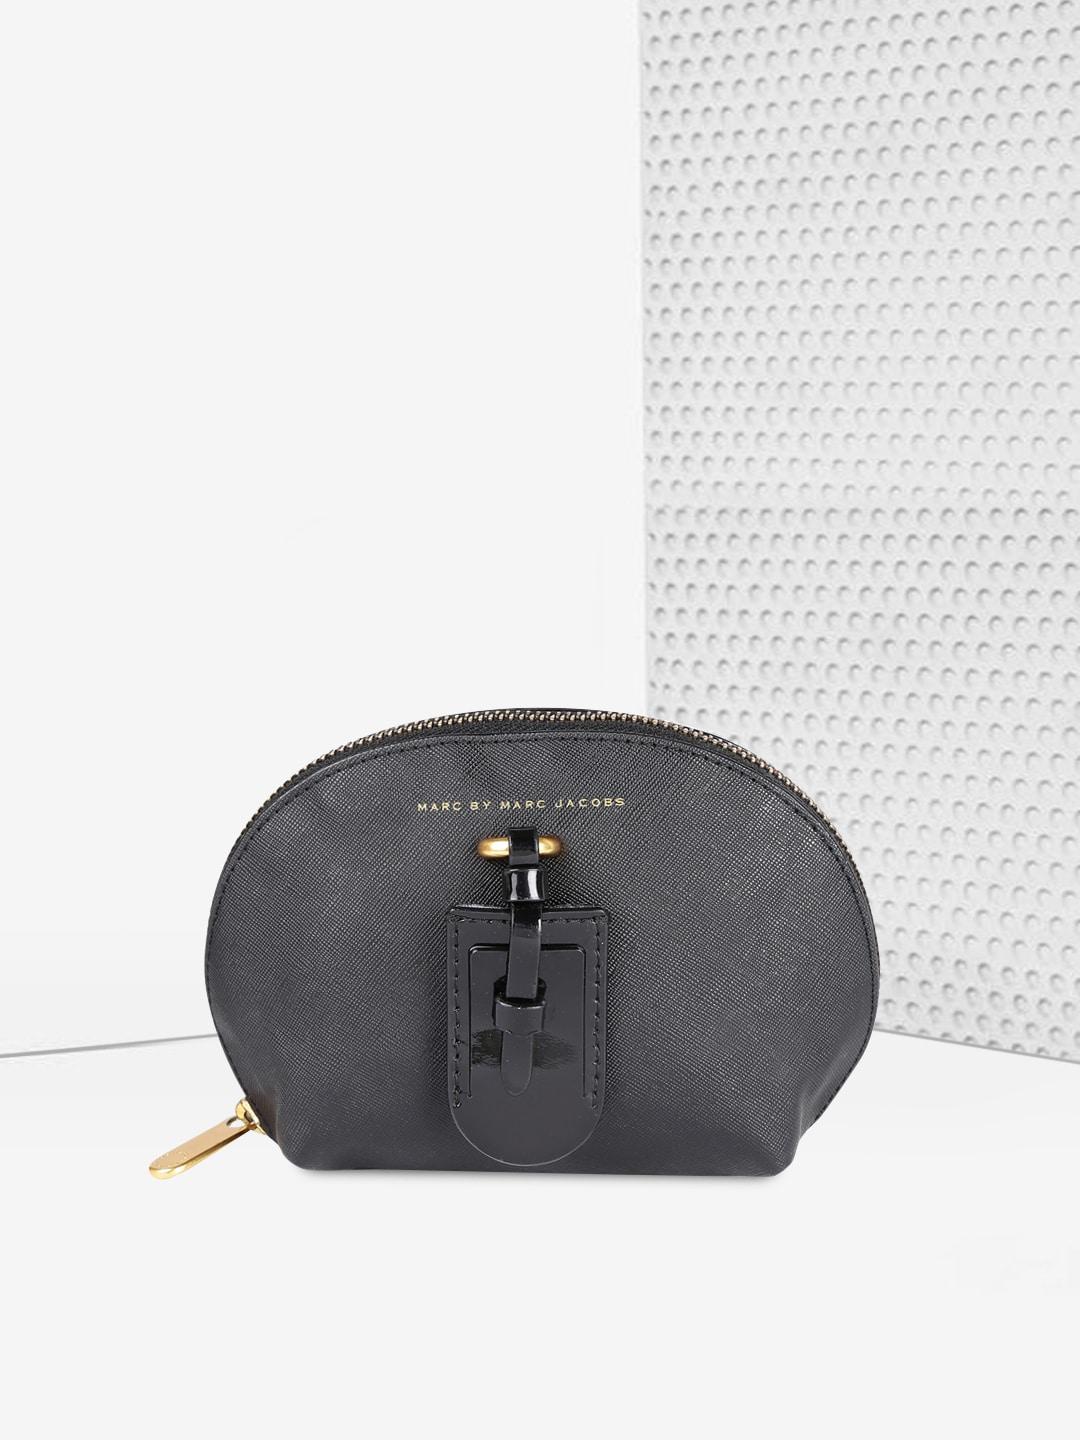 marc jacobs black solid leather purse